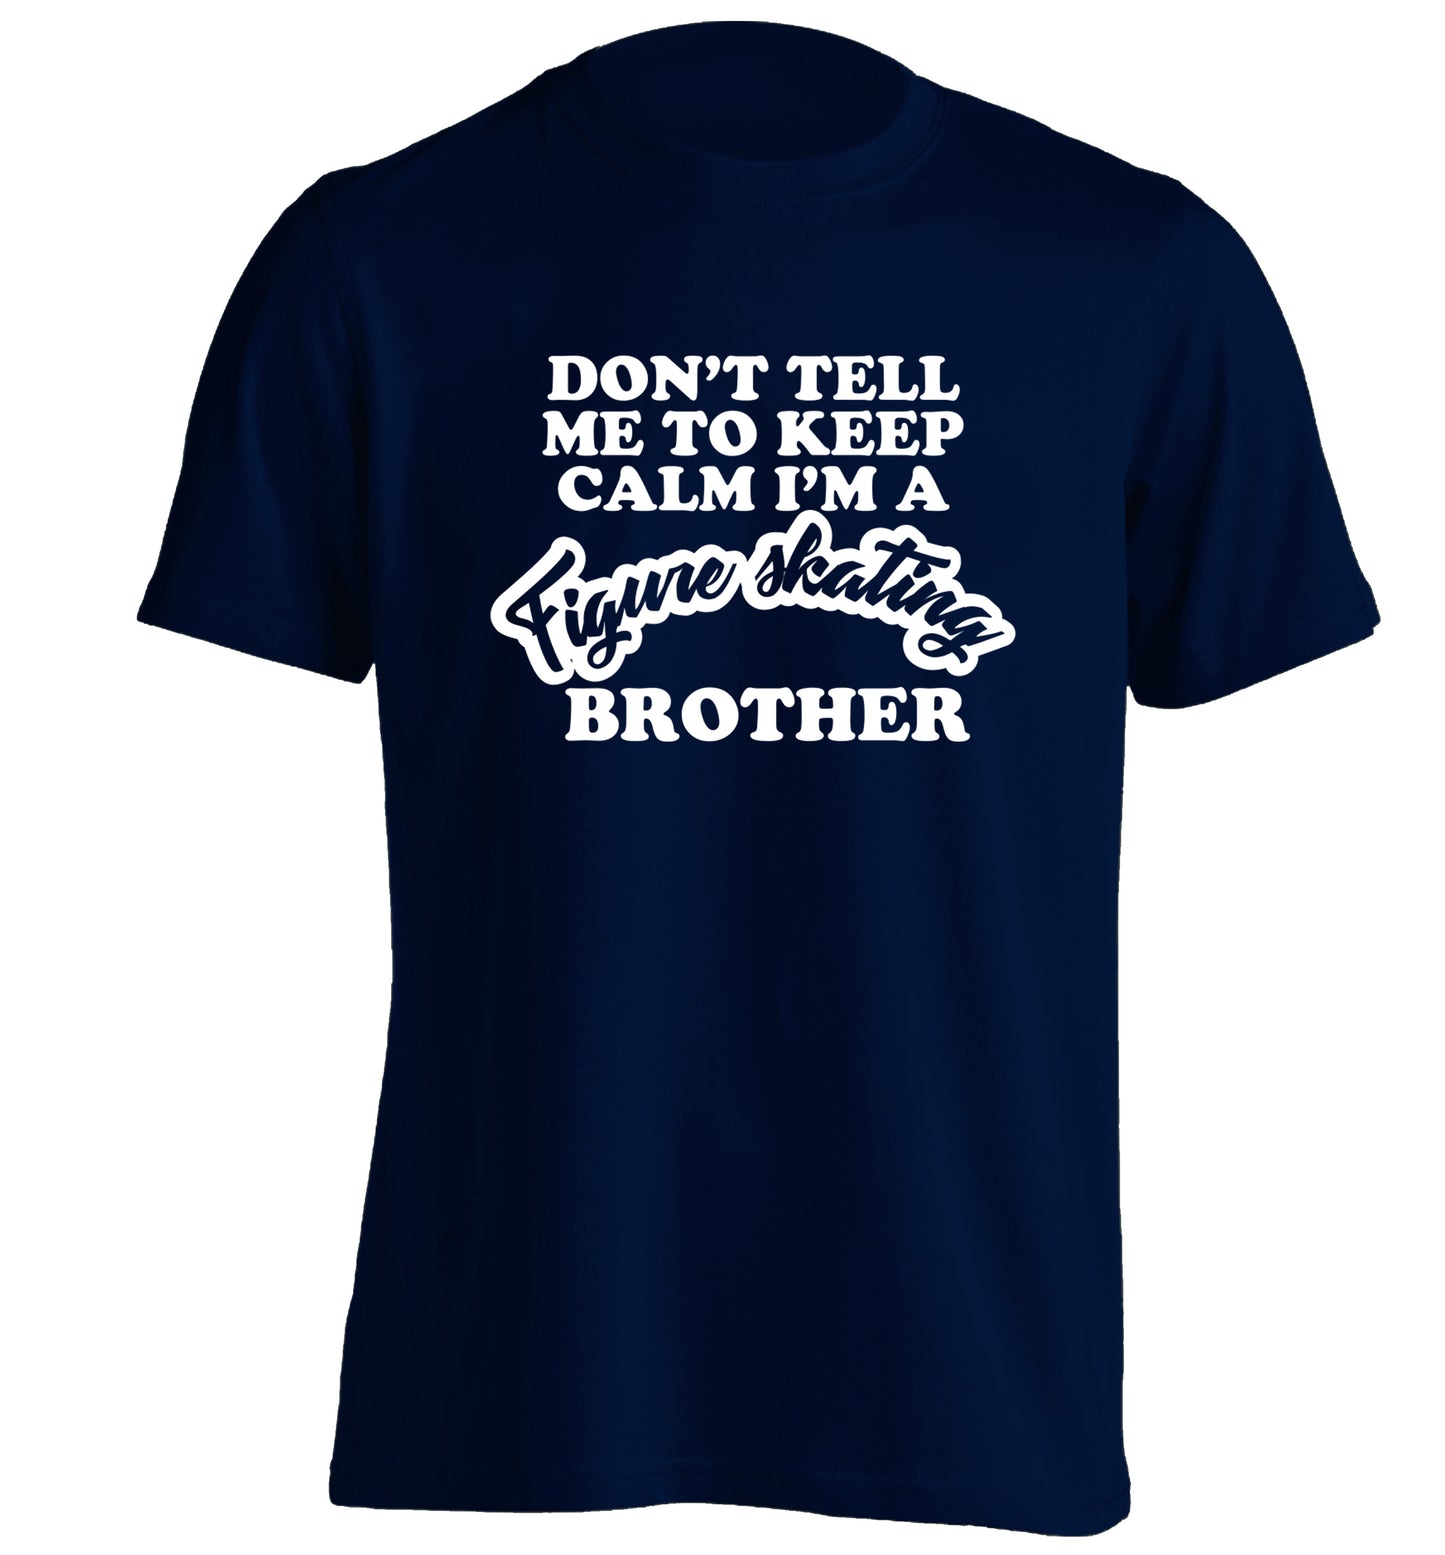 Don't tell me to keep calm I'm a figure skating brother adults unisexnavy Tshirt 2XL